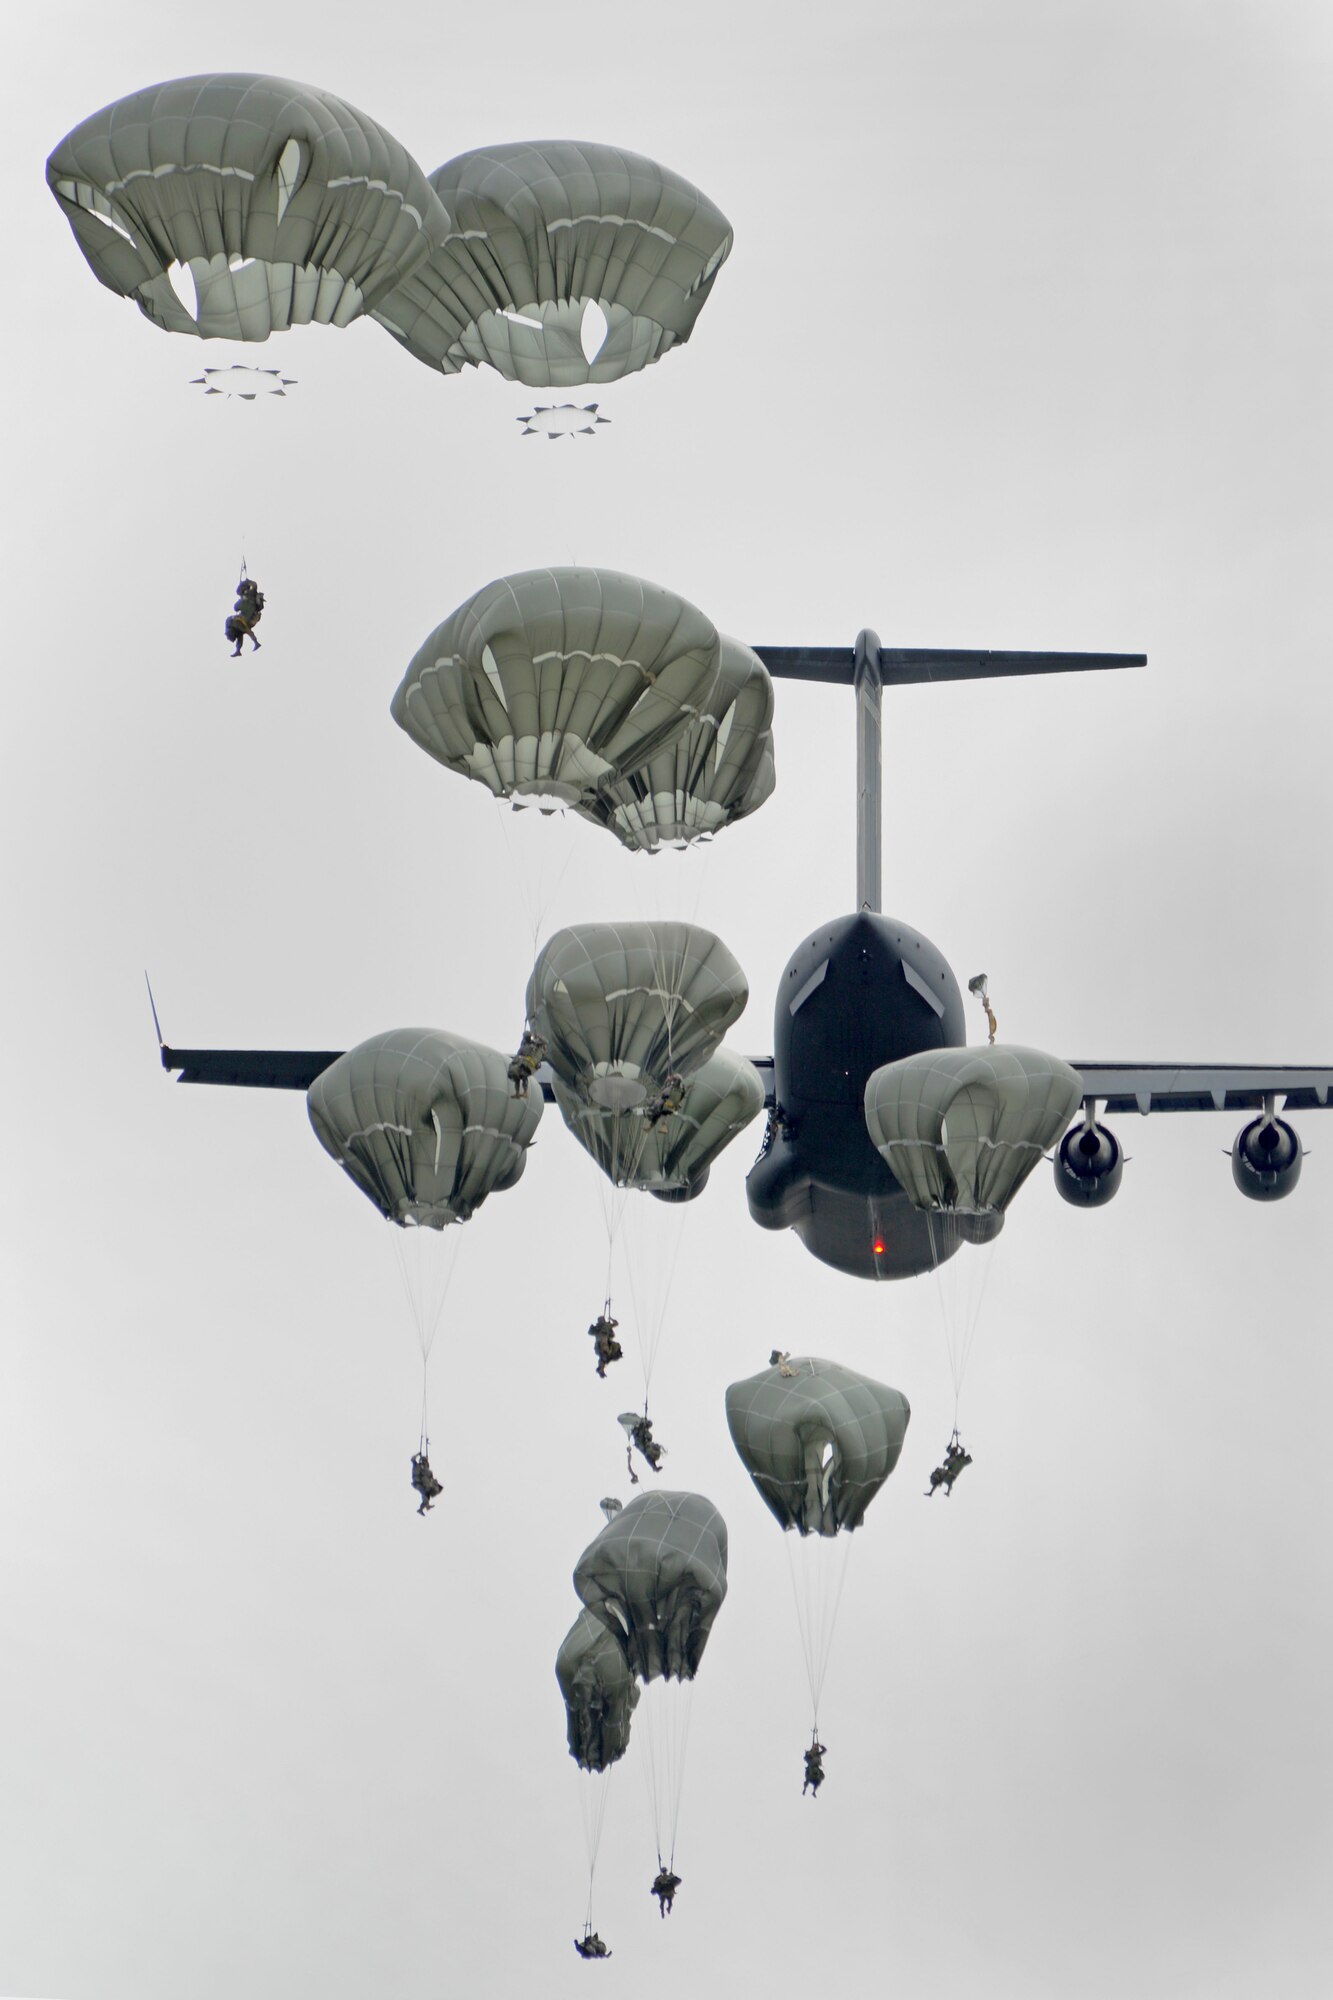 Paratroopers assigned to the 4th Infantry Brigade Combat Team (Airborne), 25th Infantry Division, U.S. Army Alaska, jump from a C-17 Globemaster III during a joint forcible entry exercise at Malemute Drop Zone on Joint Base Elmendorf-Richardson, Alaska, Aug. 23, 2016, as part of Exercise Spartan Agoge. Spartan Agoge is a brigade-level field training exercise that began Aug. 15, and focuses on an array of combat-related tasks from squad live-fire exercises to helicopter air insertion and airborne assault training. (U.S. Air Force photo by Airman 1st Class Valerie Monroy)